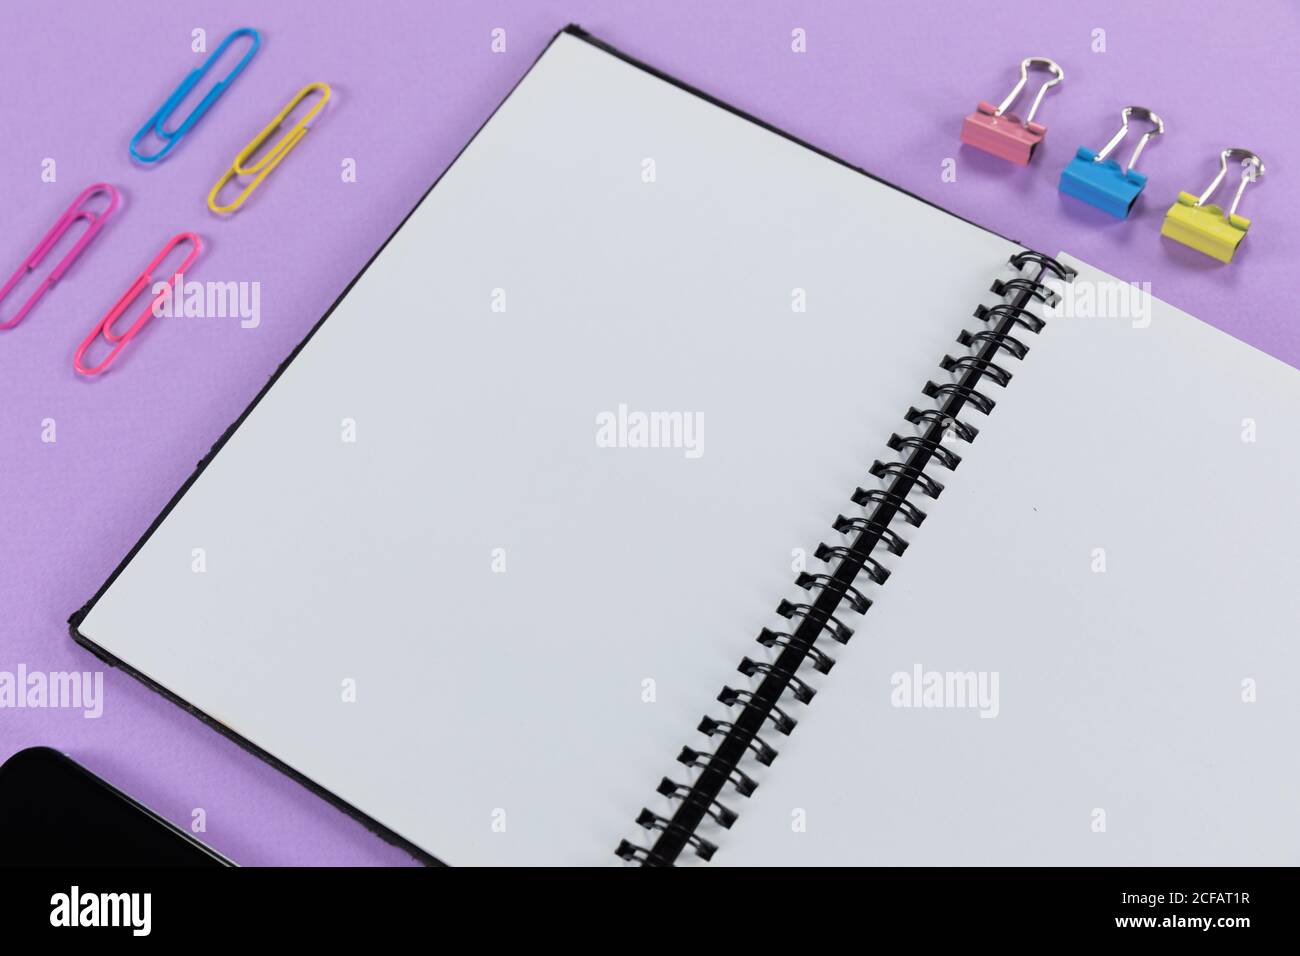 View of a notebook and colorful paperclips on plain purple background Stock Photo